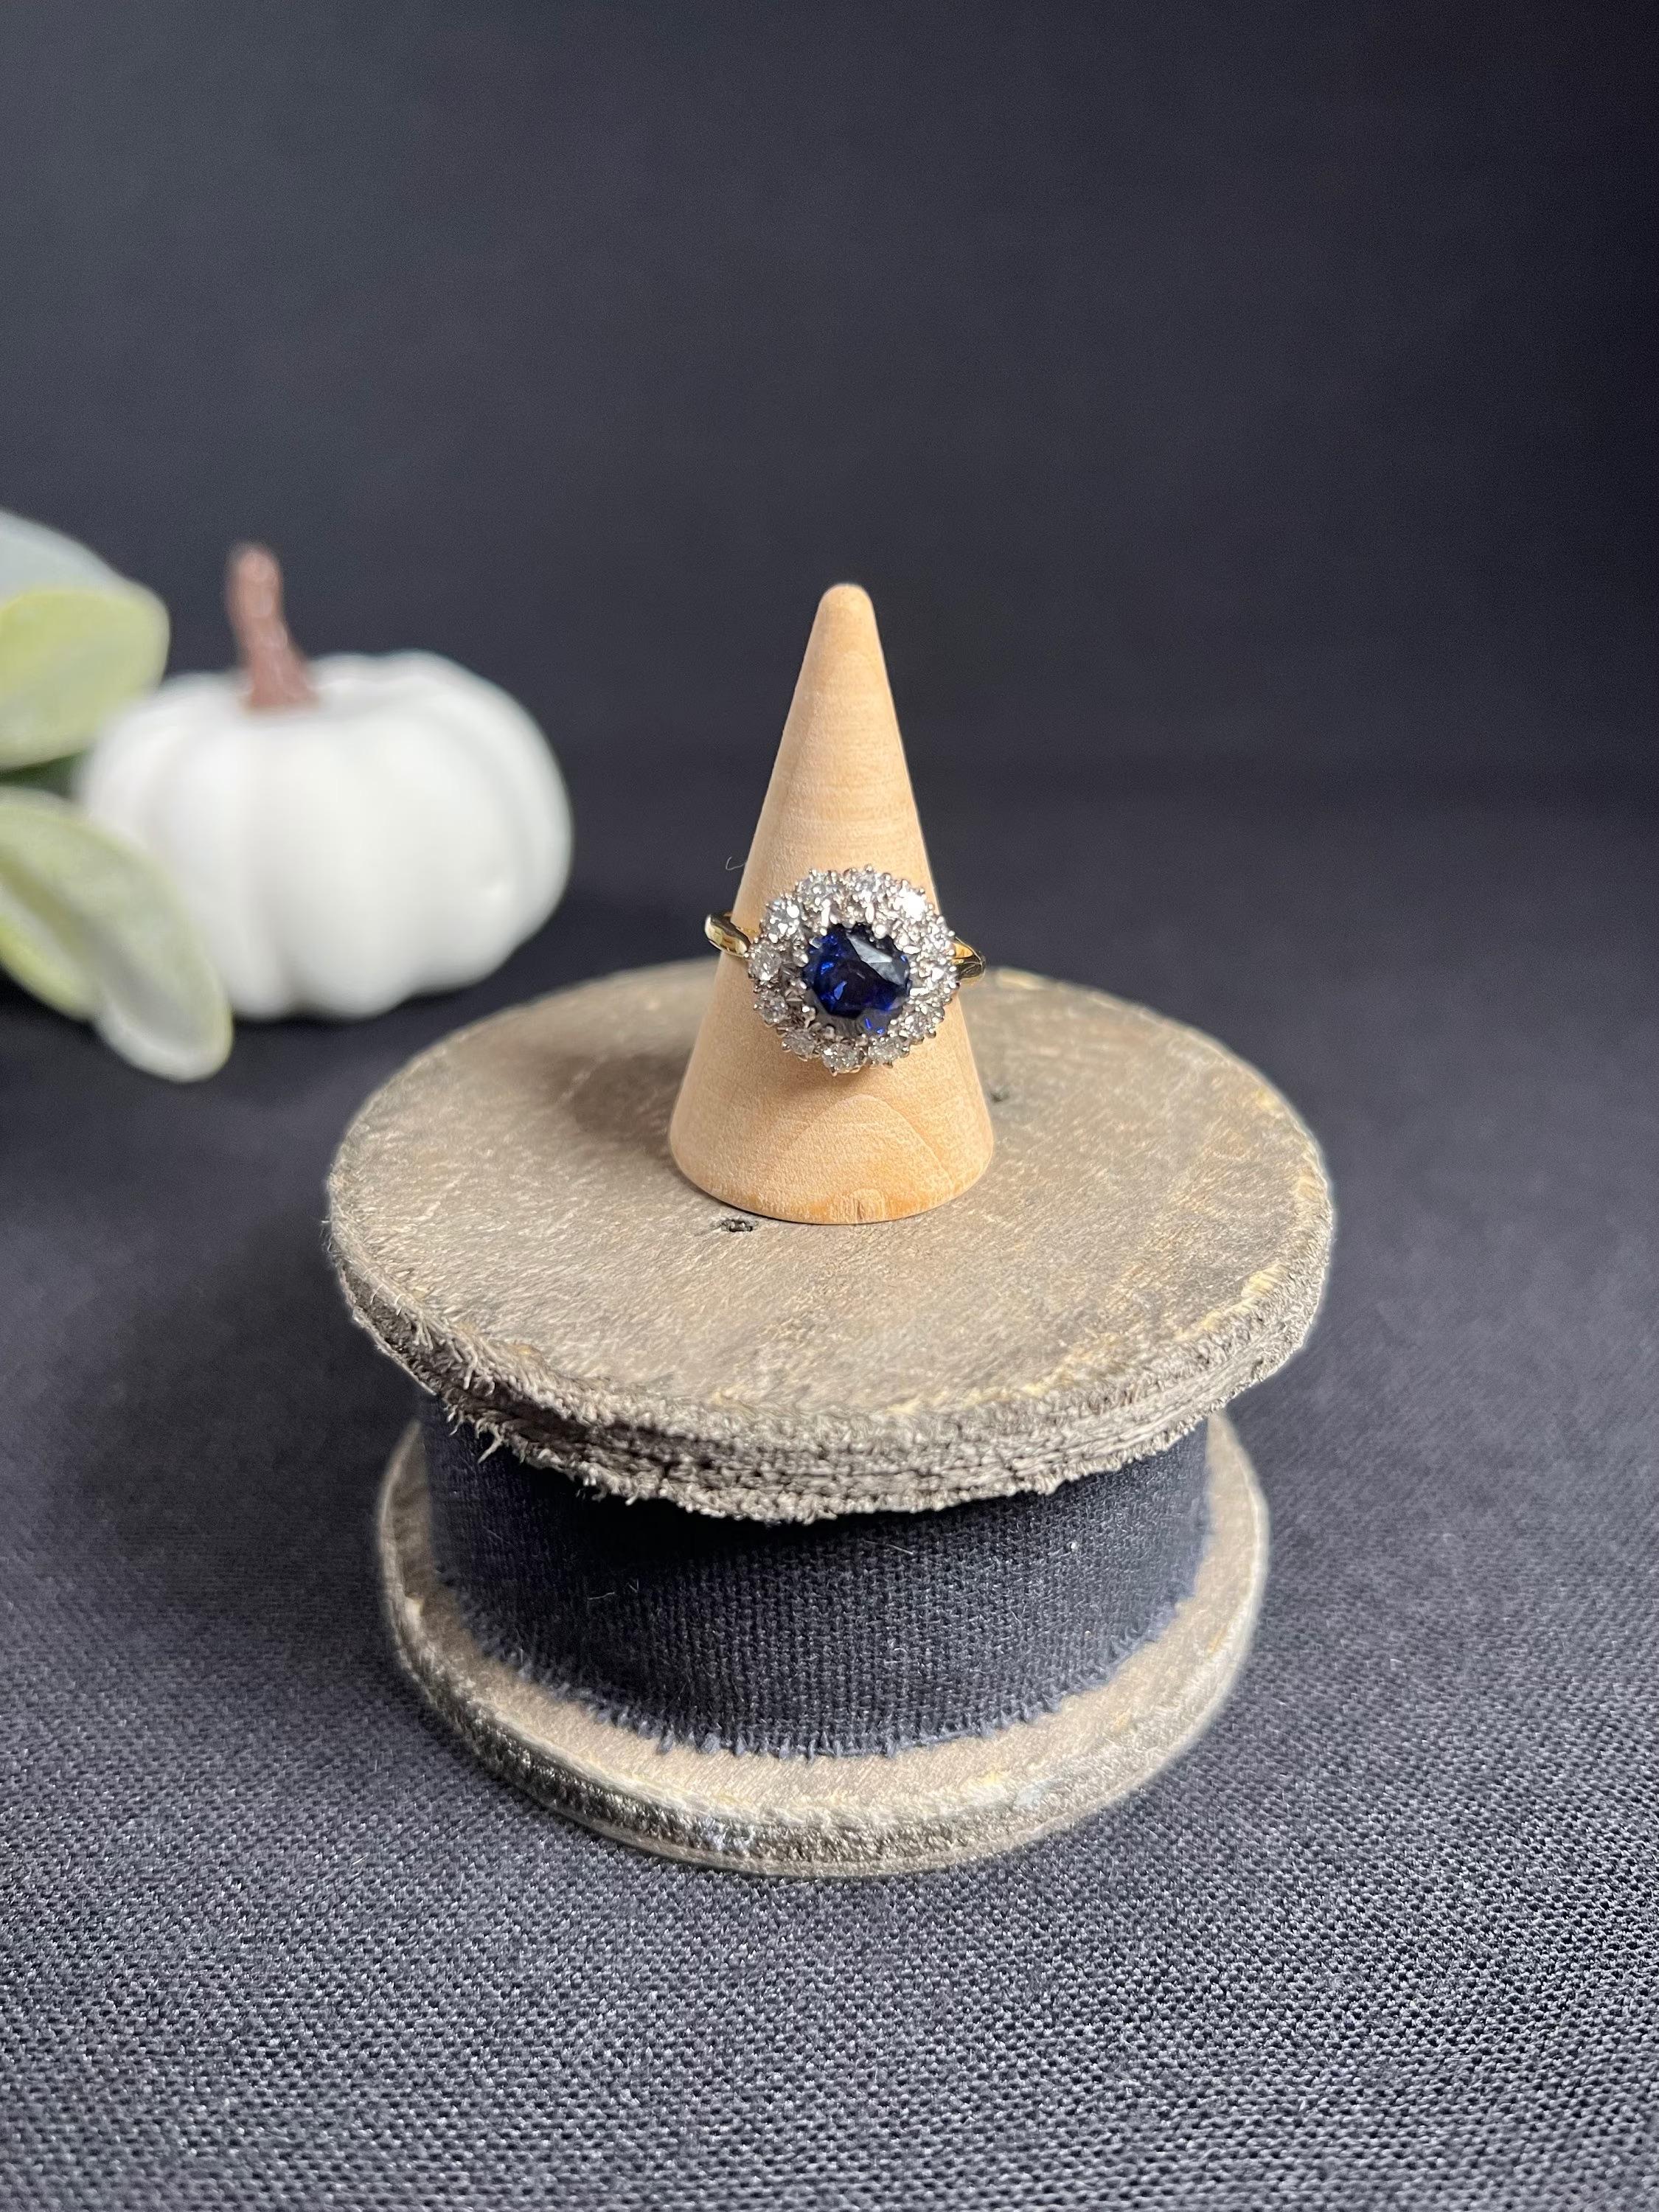 Vintage Cluster Ring

18ct Gold Stamped 

Circa 1960’s 

This 1960s vintage cluster ring is a magnificent piece of jewellery. Crafted from 18ct gold and platinum, it features a stunning faceted natural sapphire centre and a beautiful cluster of